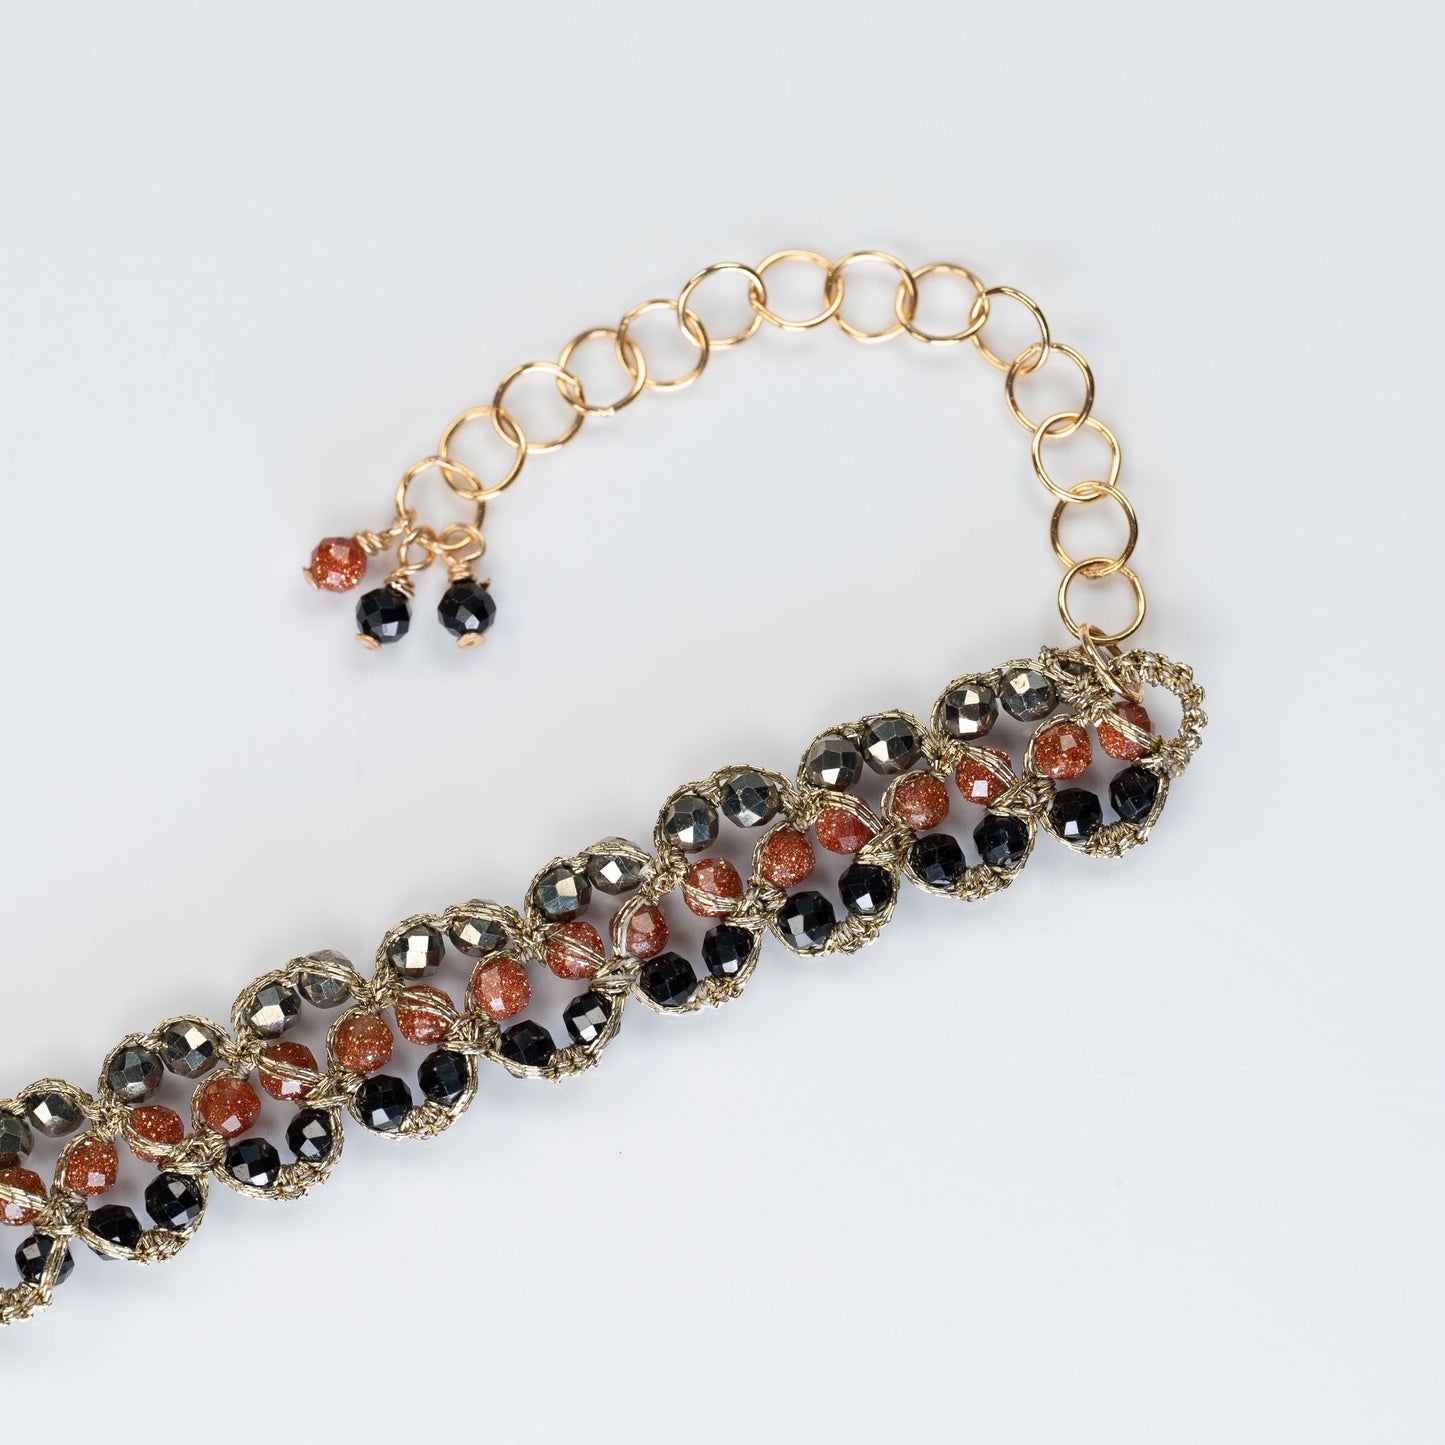 Woven Pyrite, Spinel and Sunstone Lace Bracelet